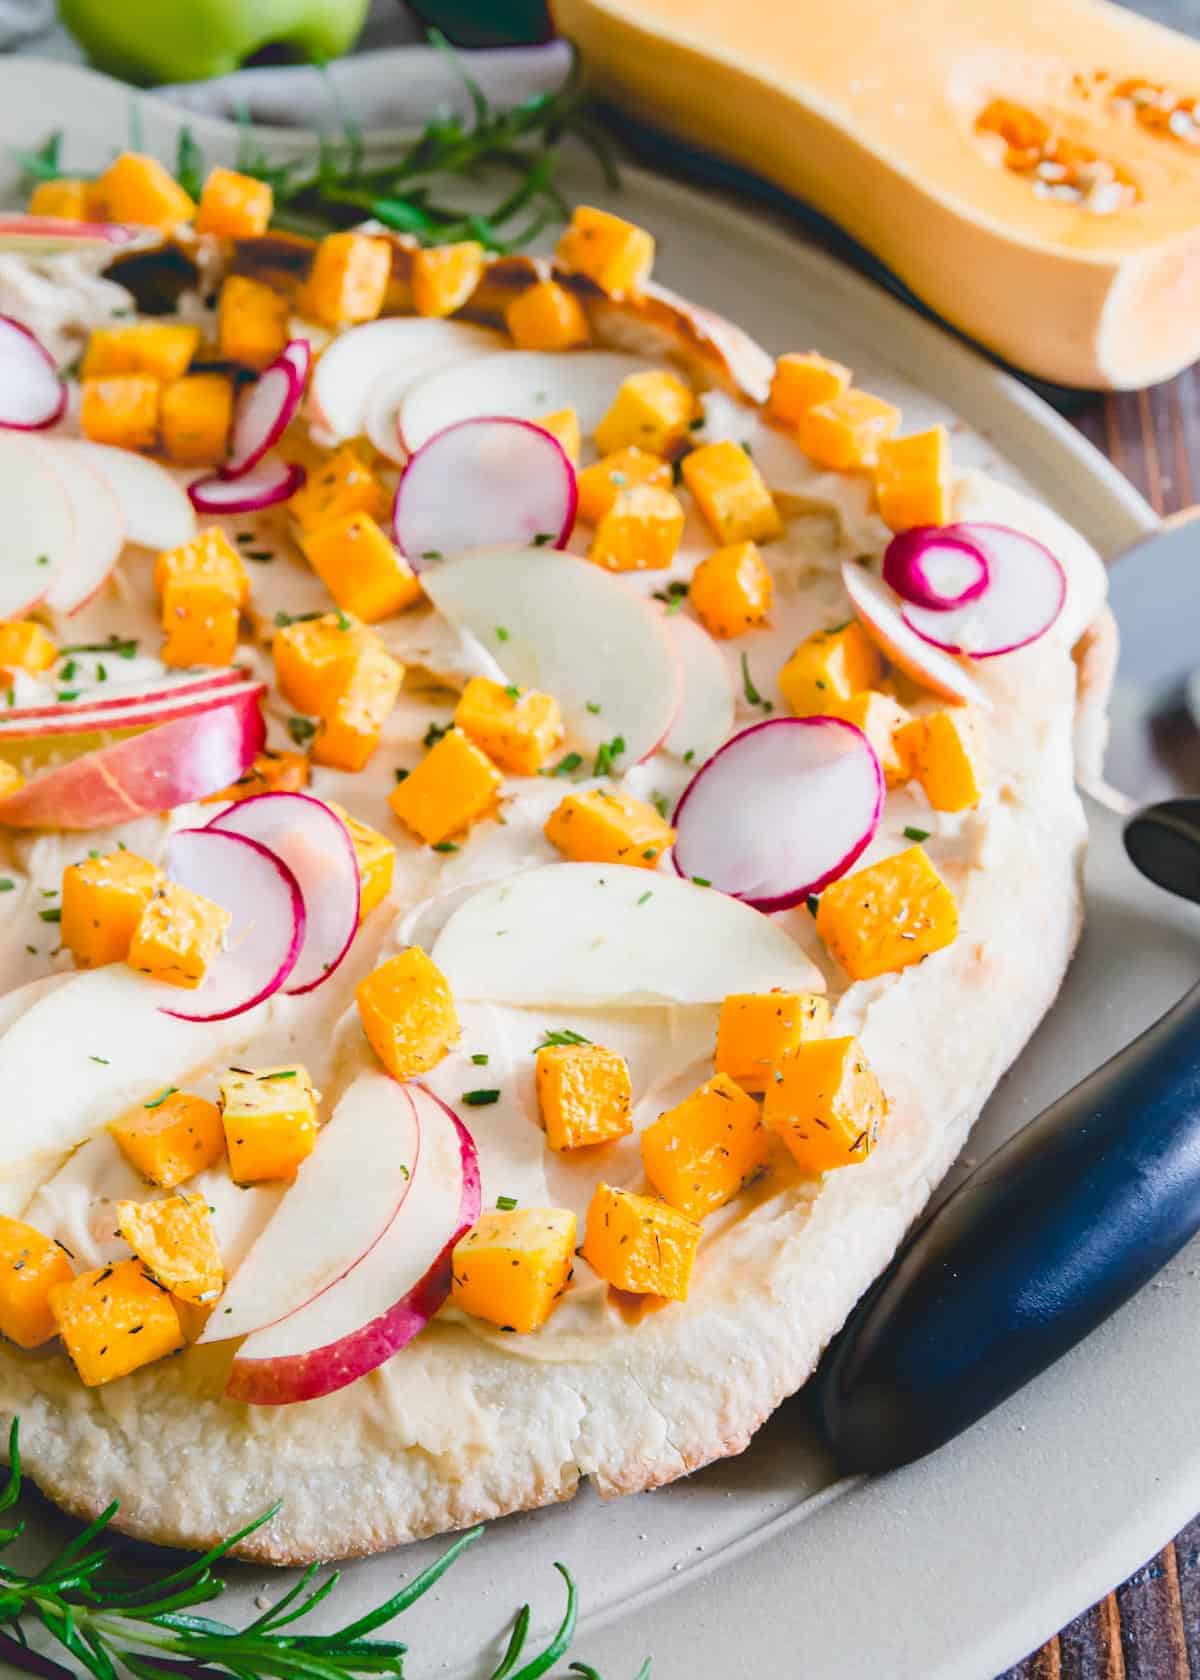 Try a healthier twist to traditional cheese pizza with this hummus pizza! Topped with roasted rosemary butternut squash, crunchy tart apples and thinly sliced radishes, it's a delicious vegetarian spin for fall.